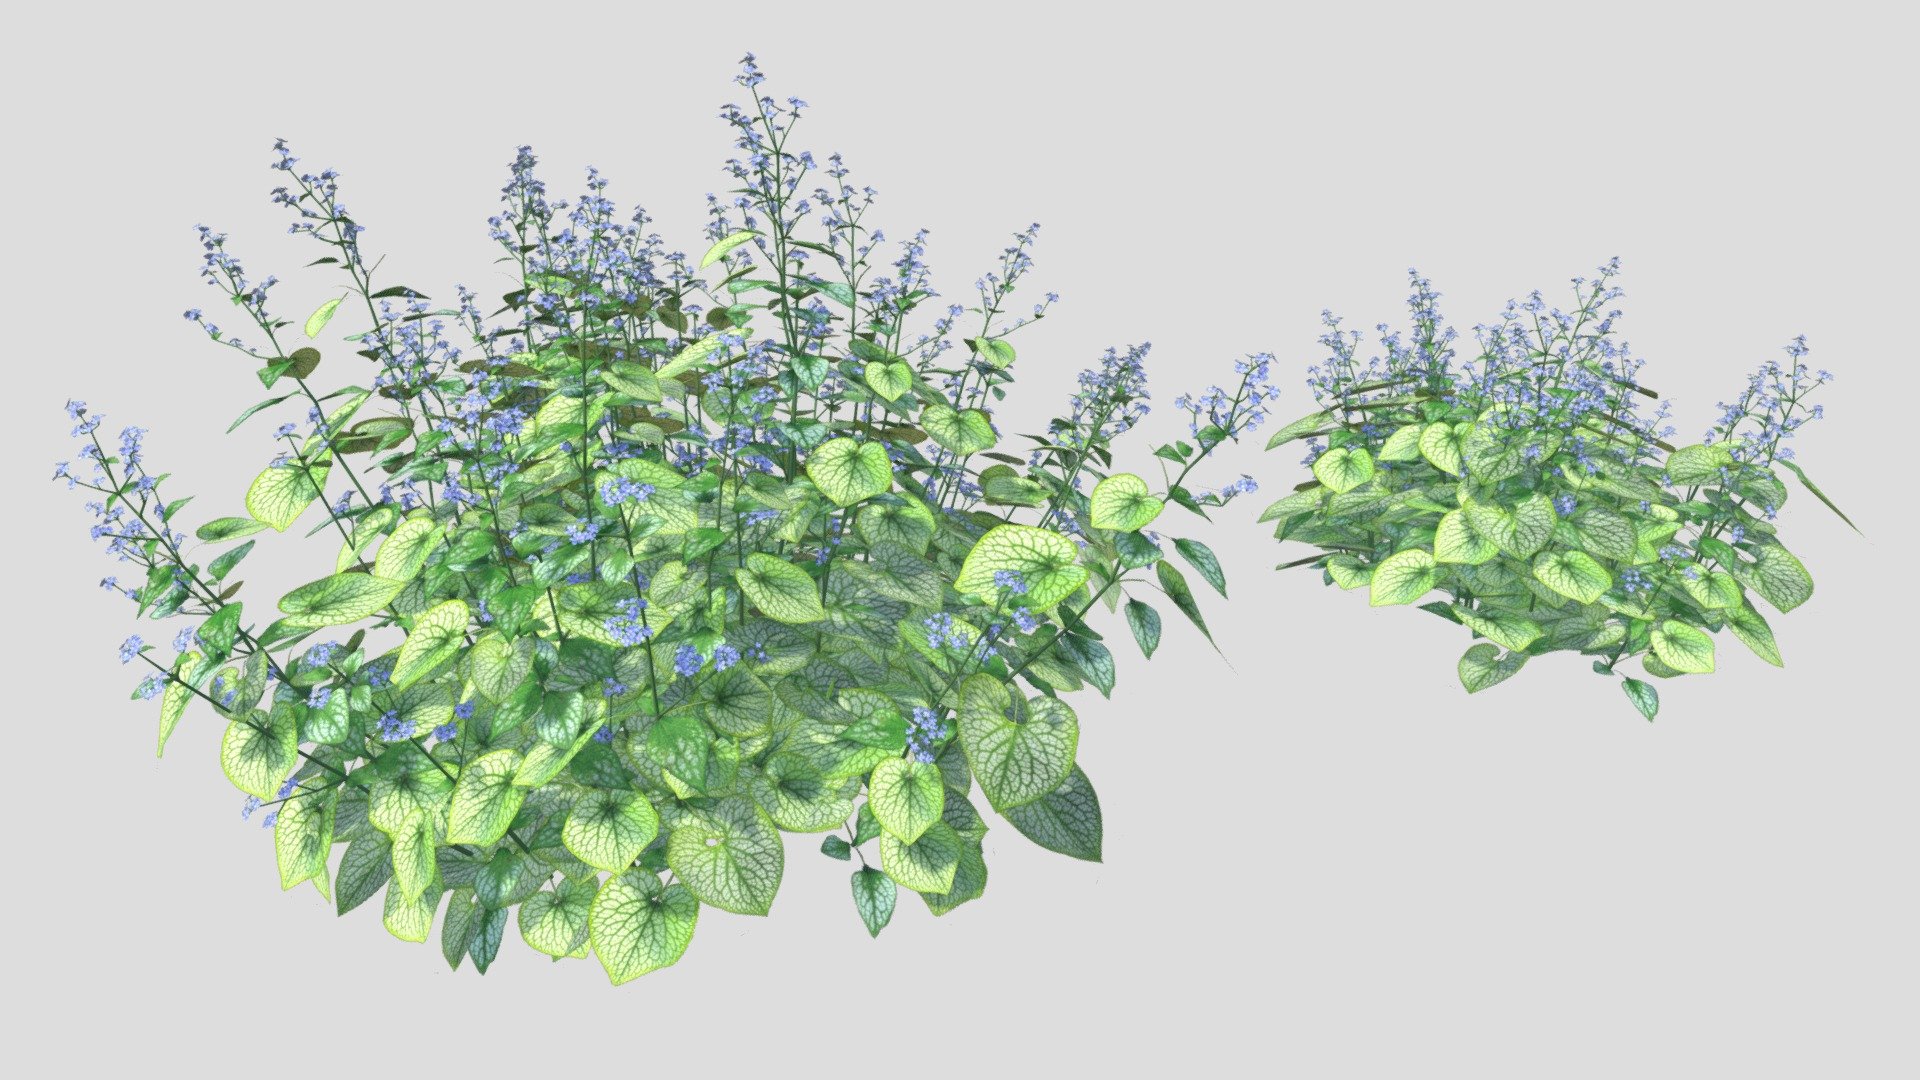 Model: Brunnera macrophylla &lsquo;Jack Frost'
Structure: Low Poly

Description:

A flowering plant often used in gardens. It blooms in the months april-may in a blue color.
Also the special texture of the leaves is a reason to plant it in a garden.
Its hight is around 30-40cm//11.8110'-15.7840'.
Mostly the planting distance is 7-9 plants per m2 or 0.65-0.84 plants per square foot.
The English name is Siberian bugloss or Great forget-me-not .
The model has a low polycount for a plant, this way it becomes more acceceble for everybody.

Objects:
Brunnera_macrophylla_'Jack_Frost'01
Brunnera_macrophylla&lsquo;Jack_Frost'_02

Features:
- Textures 1024x1024;
- Clean topology;
- Low poly modeling;
- No N-GONS (Quads Only);

Native file format:
.blend

Rendered with:
Cycles

Brunnera_macrophylla_'Jack_Frost'_01:
Polygons: 272 360
Vertices: 157 120

Brunnera_macrophylla_'Jack_Frost'_02:
Polygons: 486 012
Vertices: 279 367

Plants combined:
Polygons: 758 372
Vertices: 436 487

Have Fun! - Brunnera Macrophylla ' Jack Frost' - Buy Royalty Free 3D model by Nico van der Noll (@Nico.Van.Der.Noll) 3d model